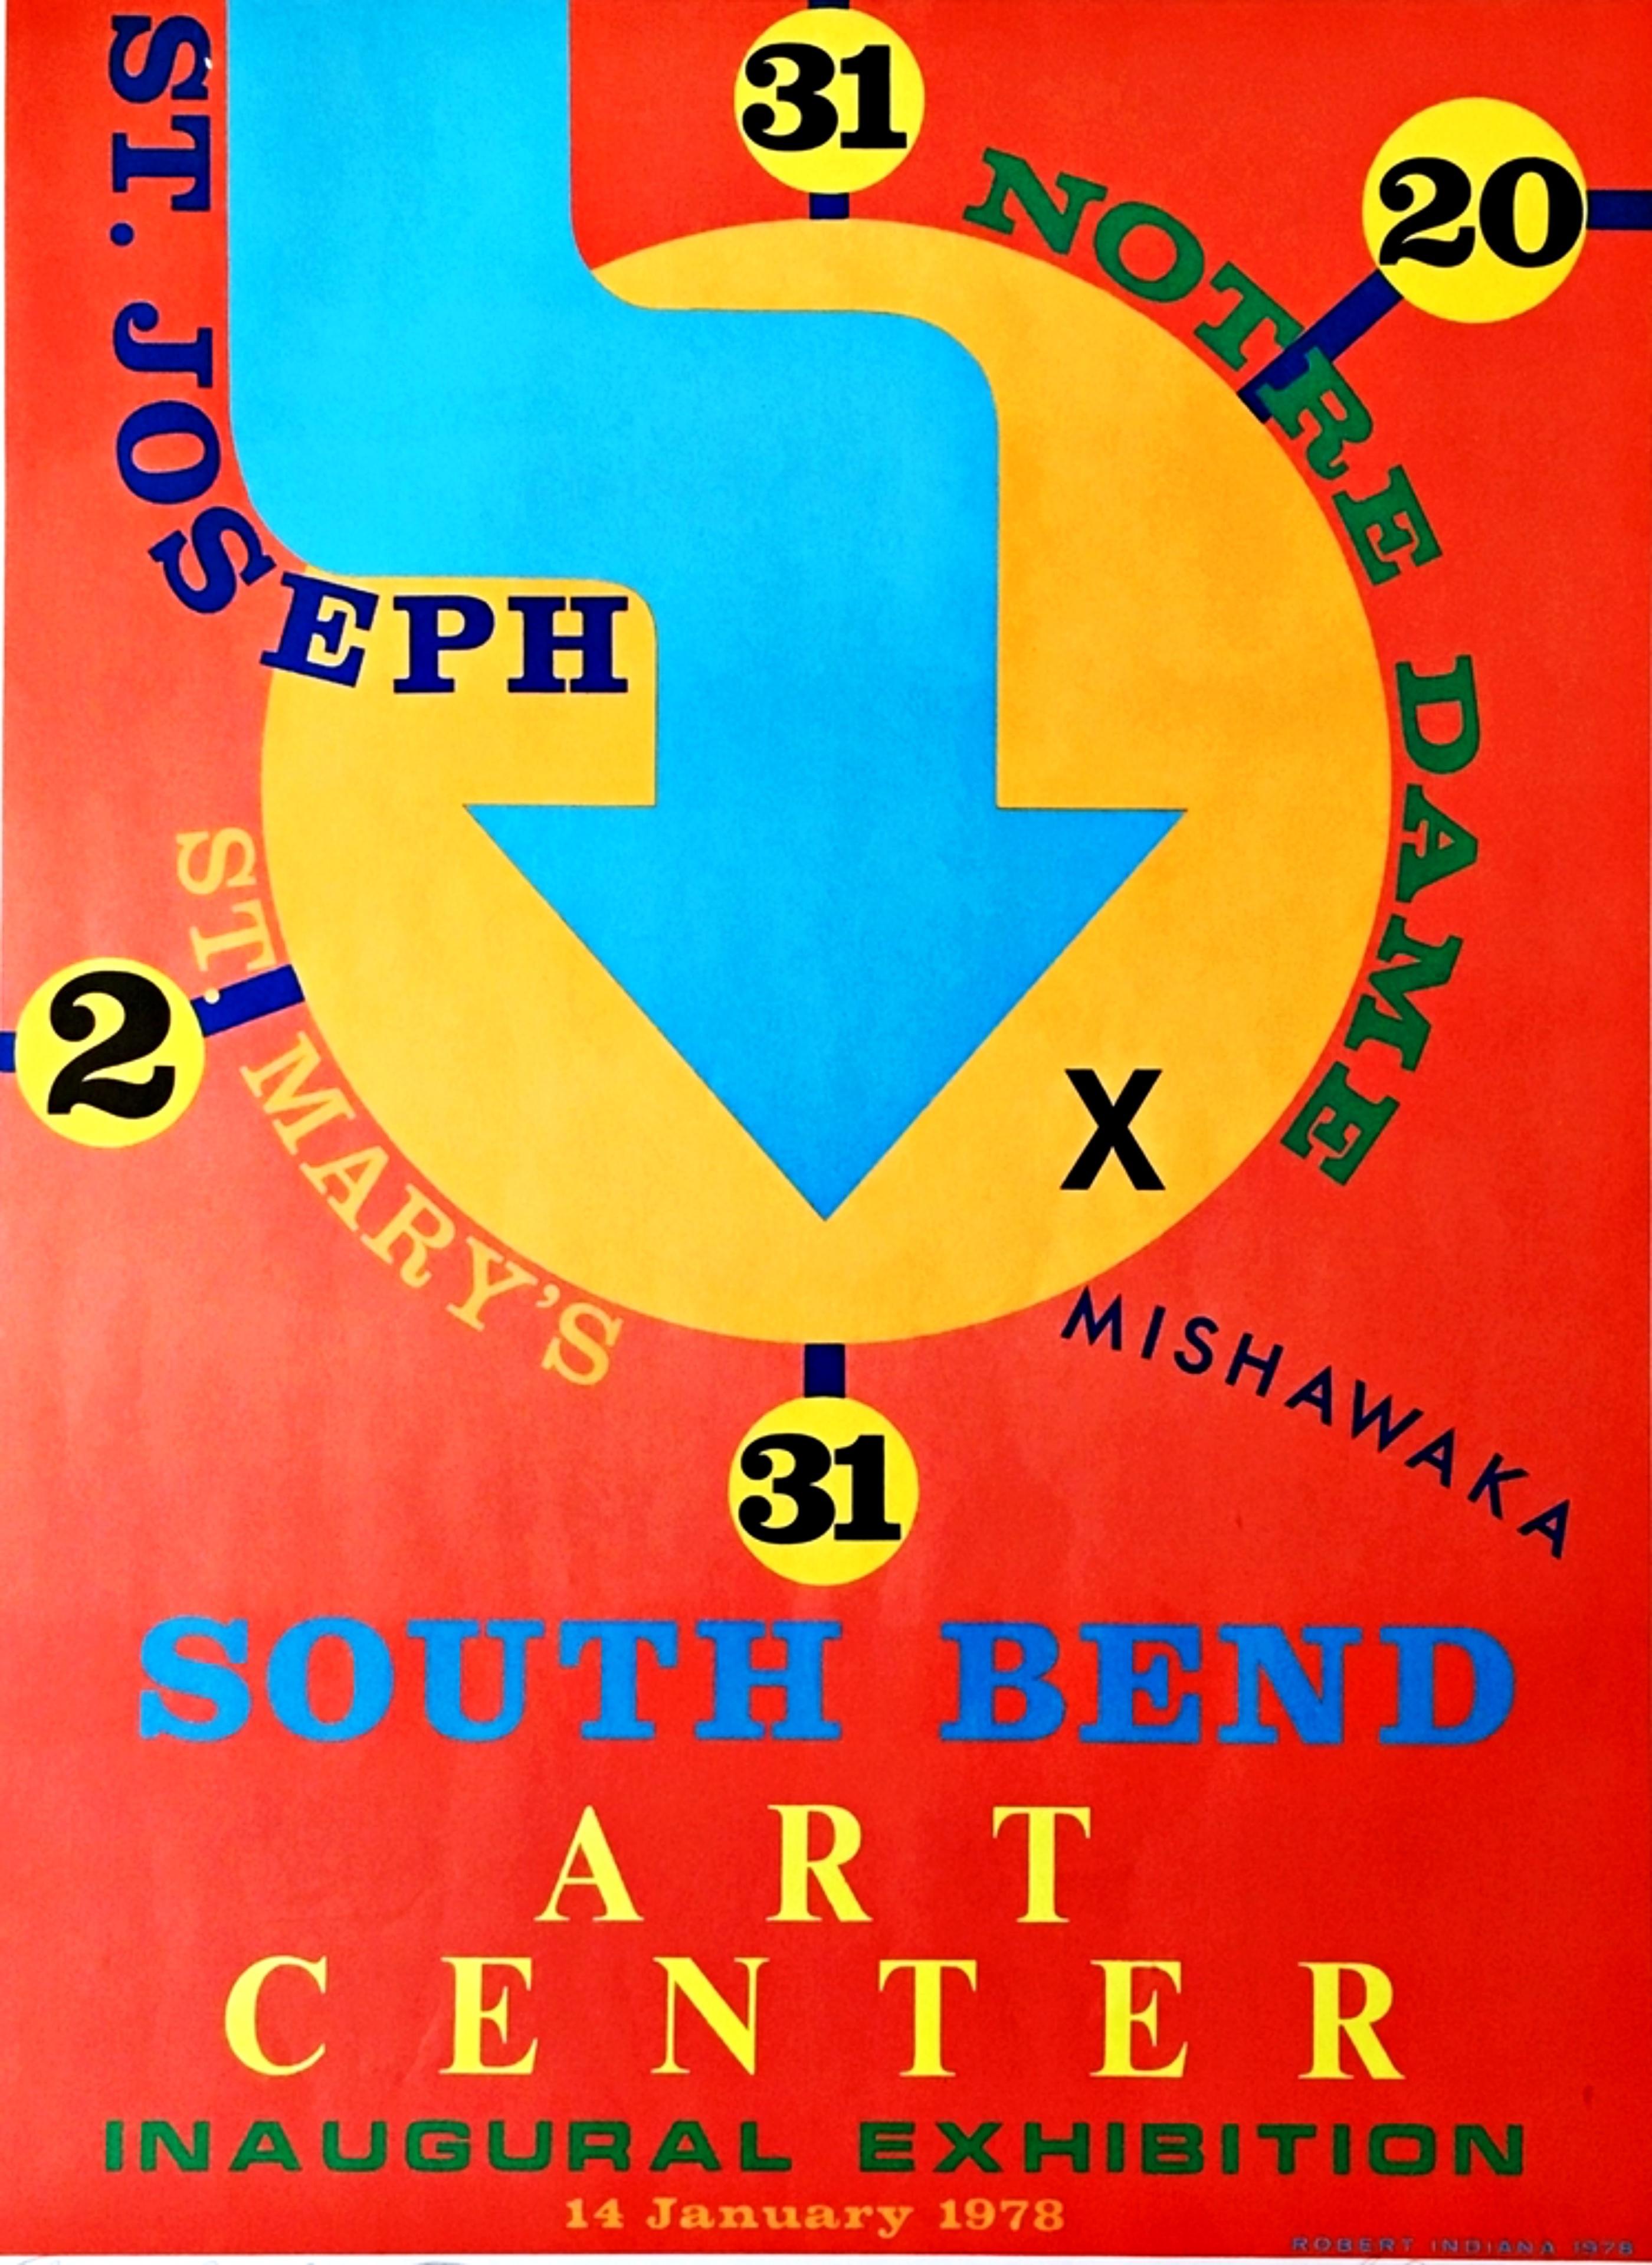 Robert Indiana Abstract Print - South Bend Art Center (Hand signed and inscribed)